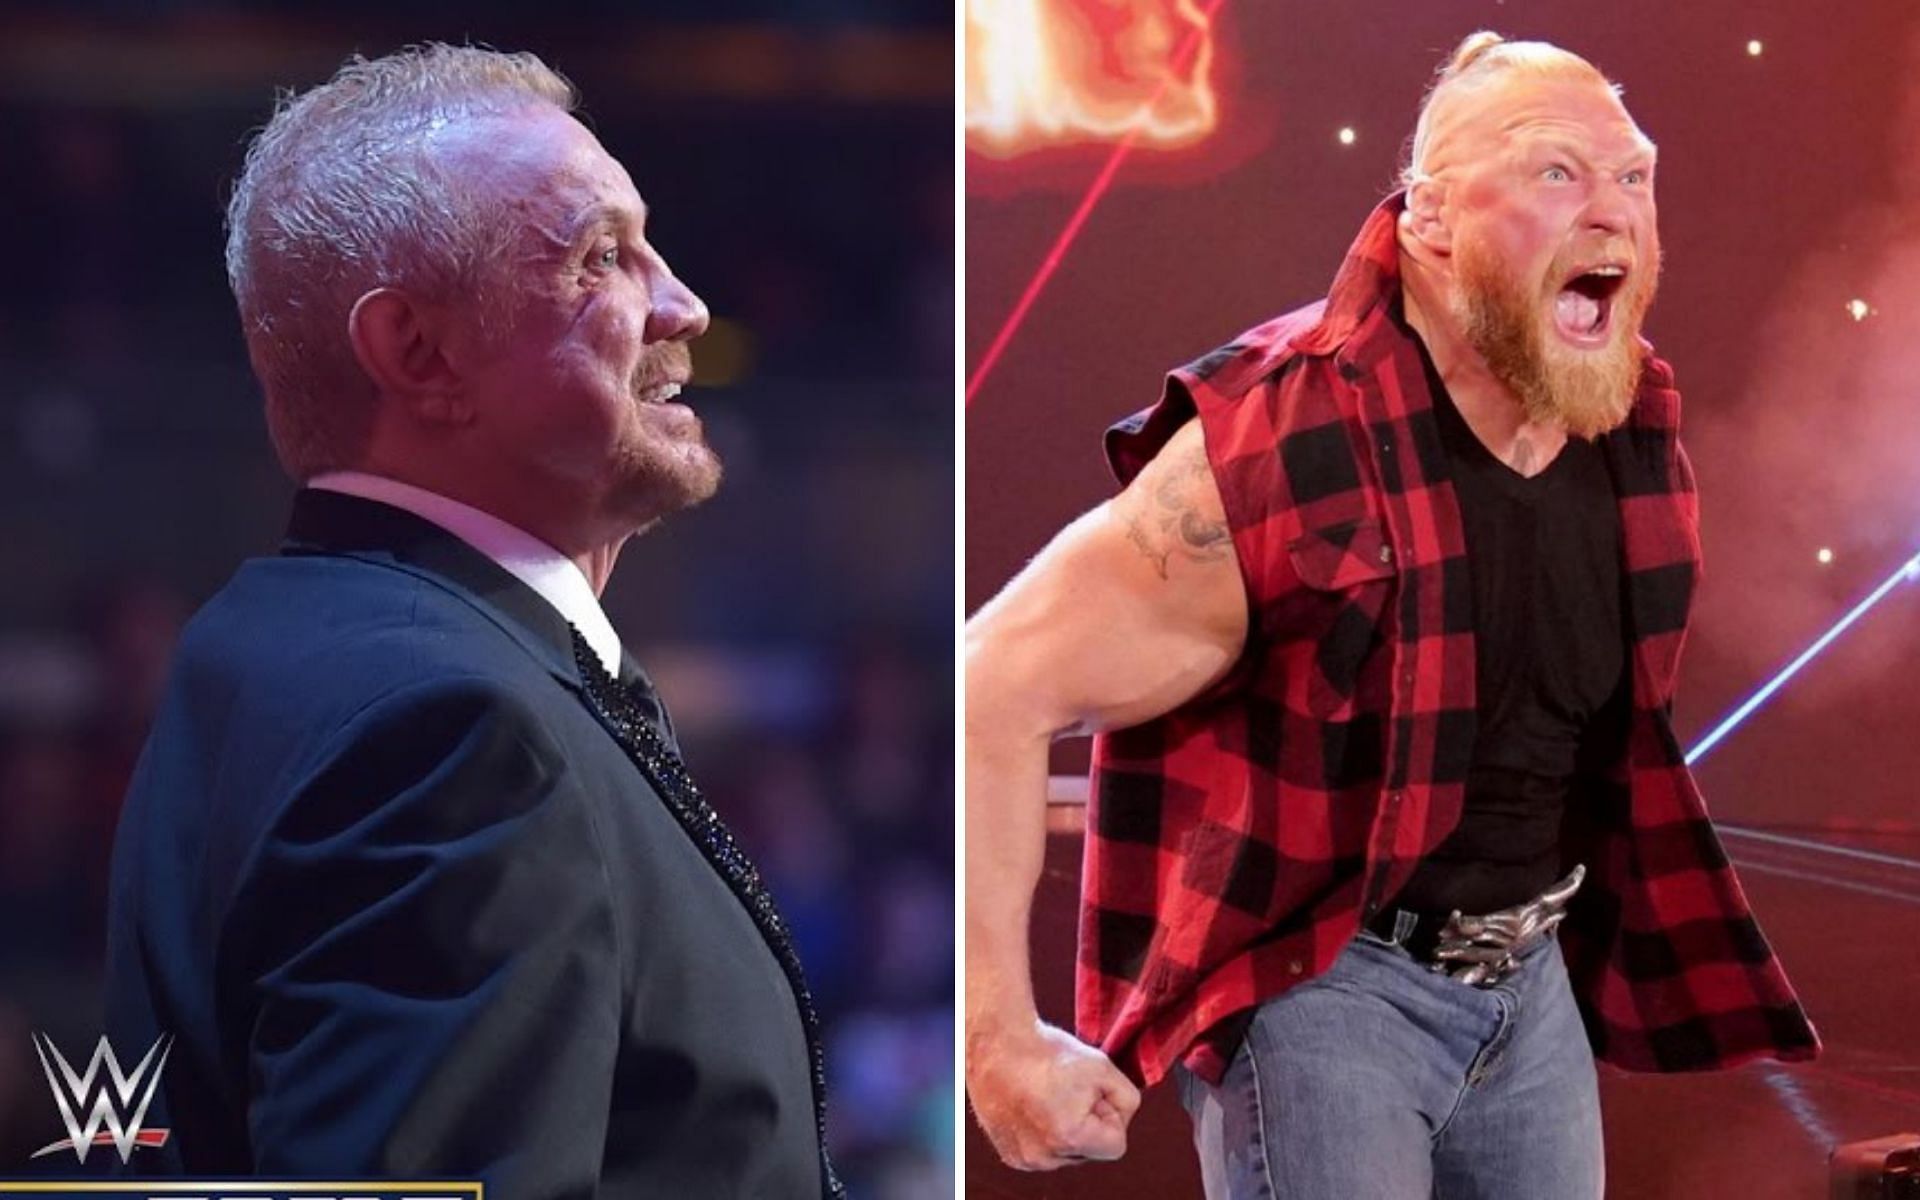 WWE Hall of Famer Diamond Dallas Page (left); Brock Lesnar (right)